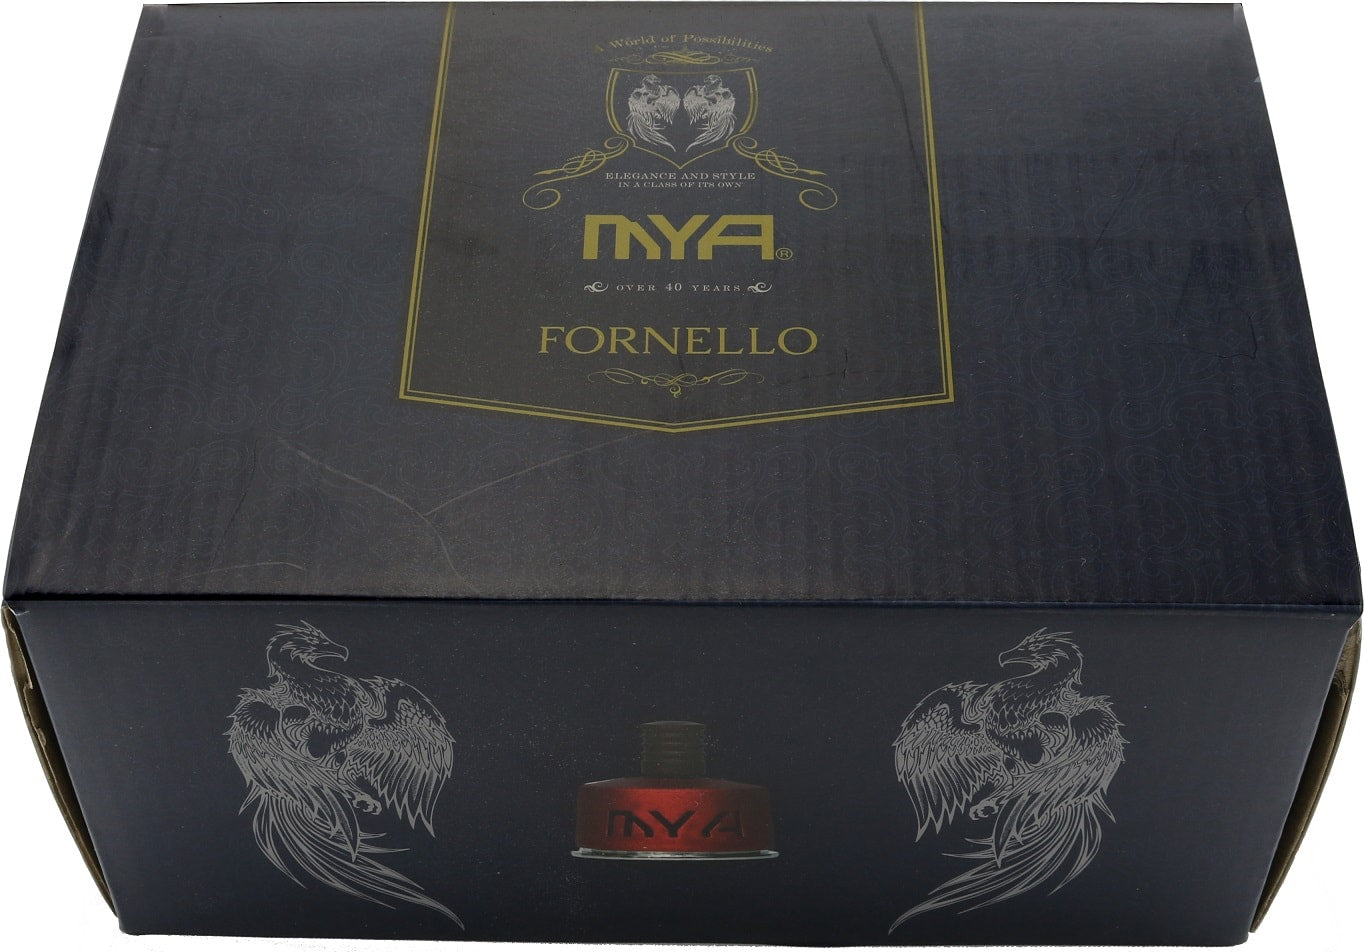 Fornello +409 packaging